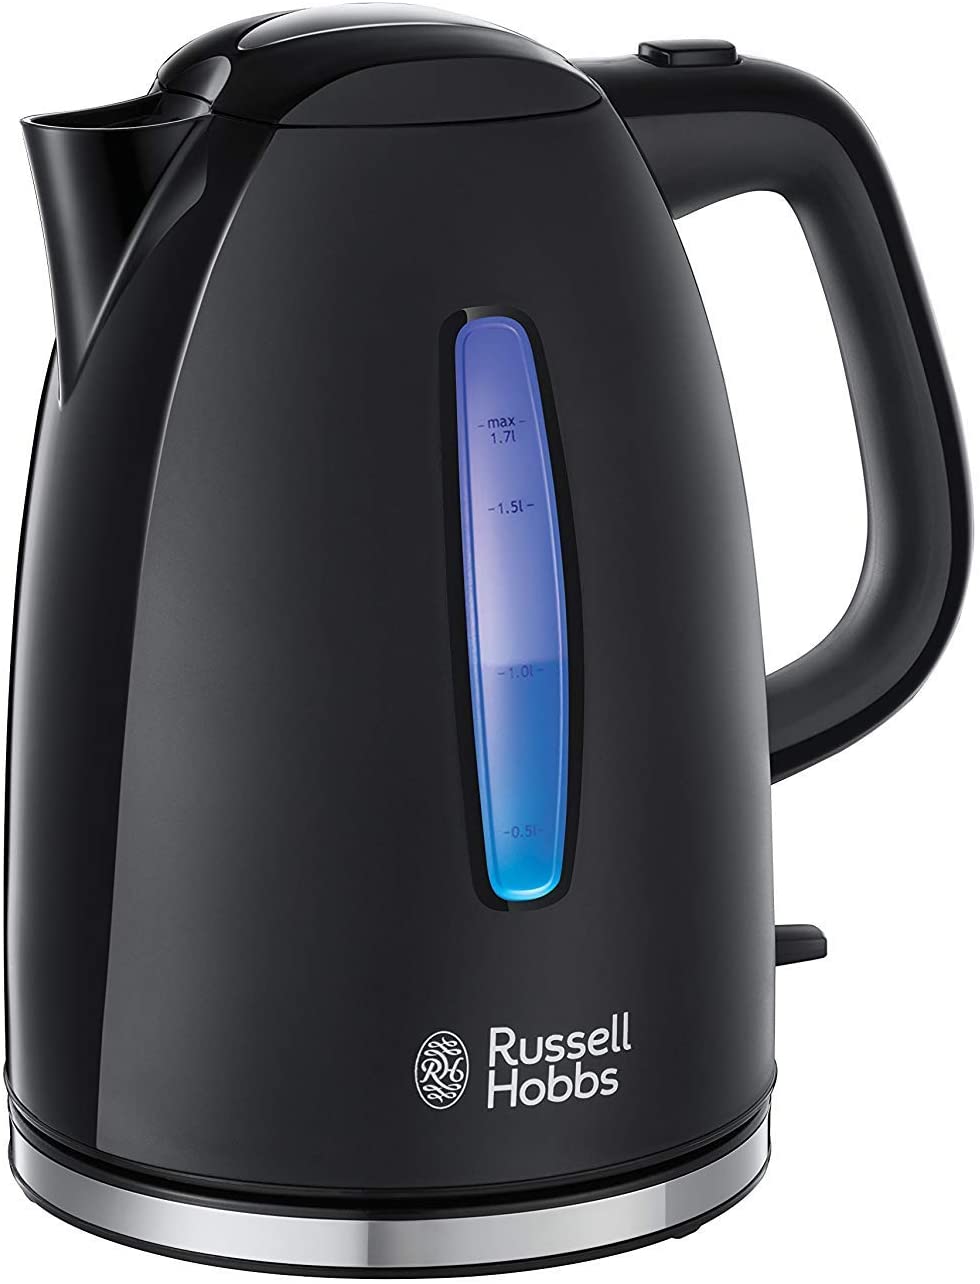 Russell Hobbs Textures+ 22591-70 Kettle 1.7 L 2400 W LED Lighting, Quick Cooking Function, Optimised Spout, Removable Limescale Filter, Tea Maker, Black, Energy Class A++